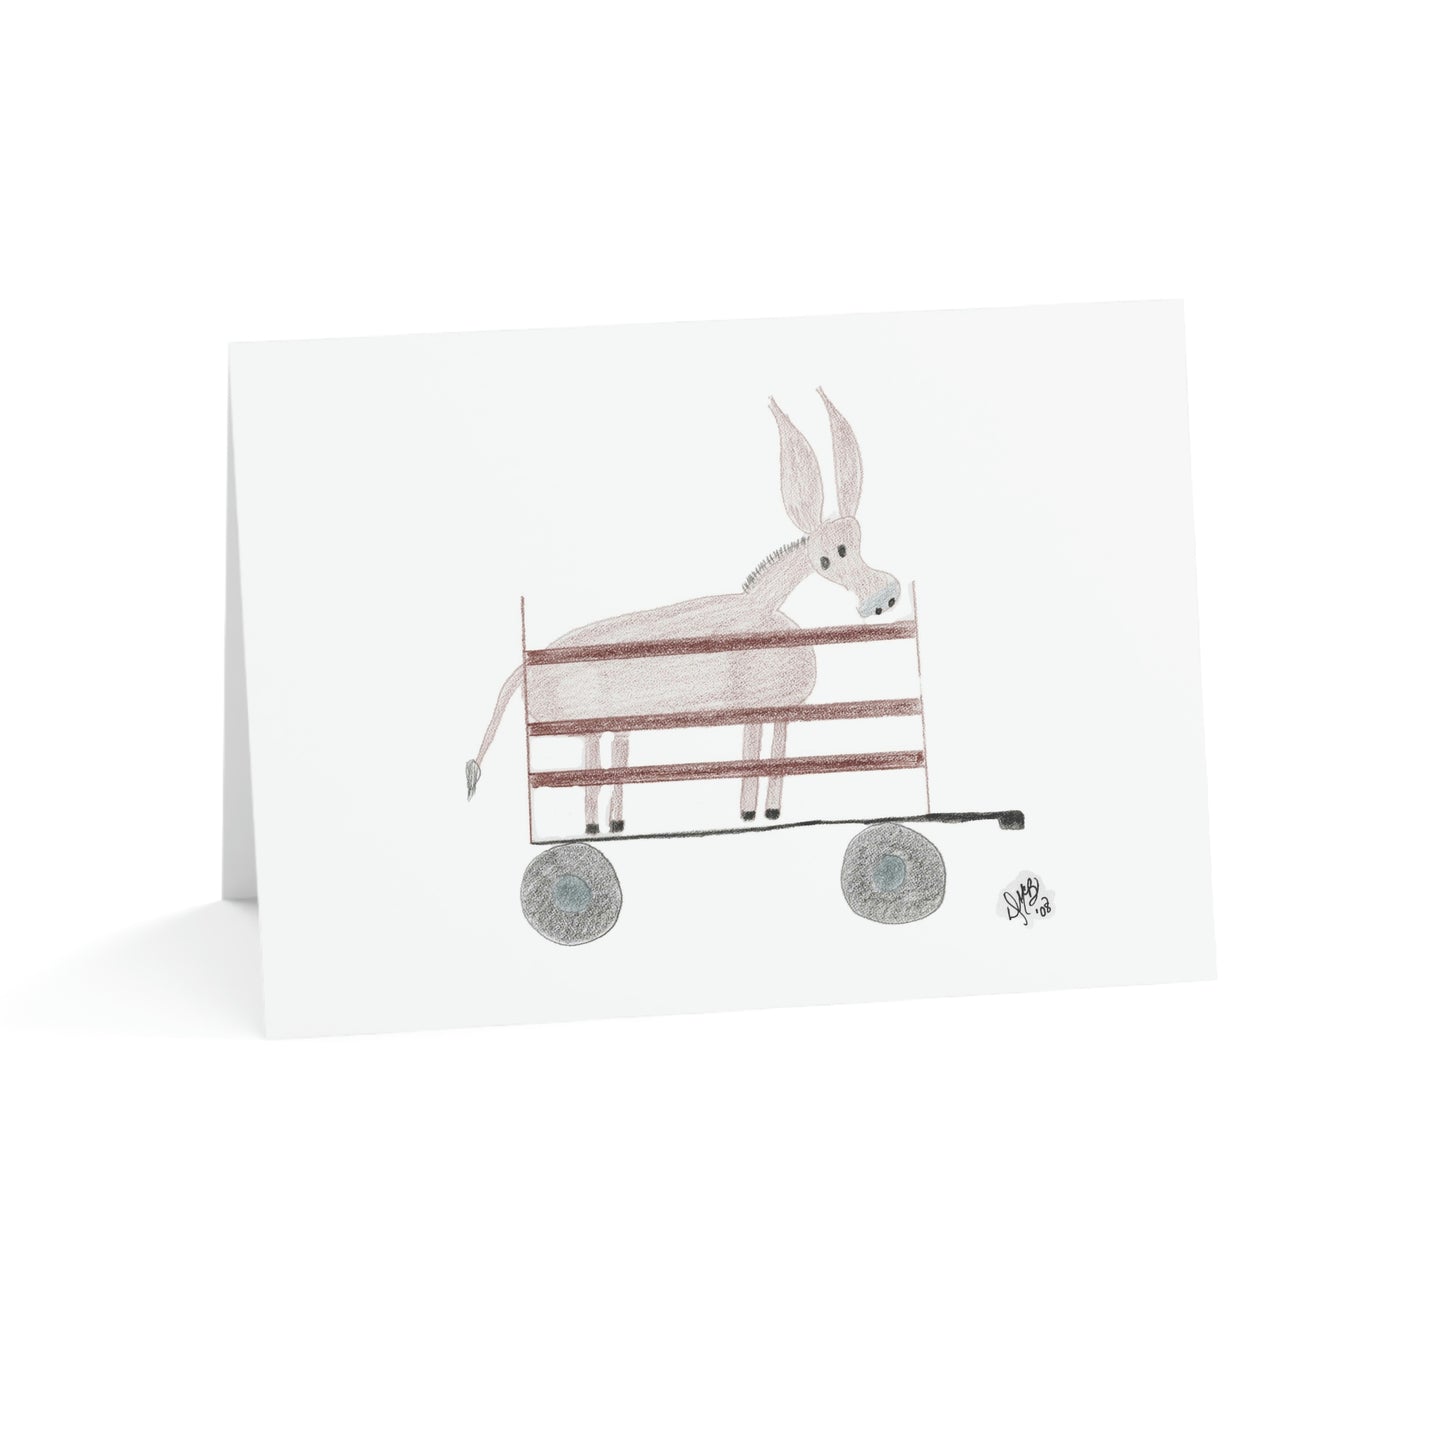 Thank You - Thank You for Hauling My Ass Around - Greeting Cards (1, 10, 30, and 50pcs)